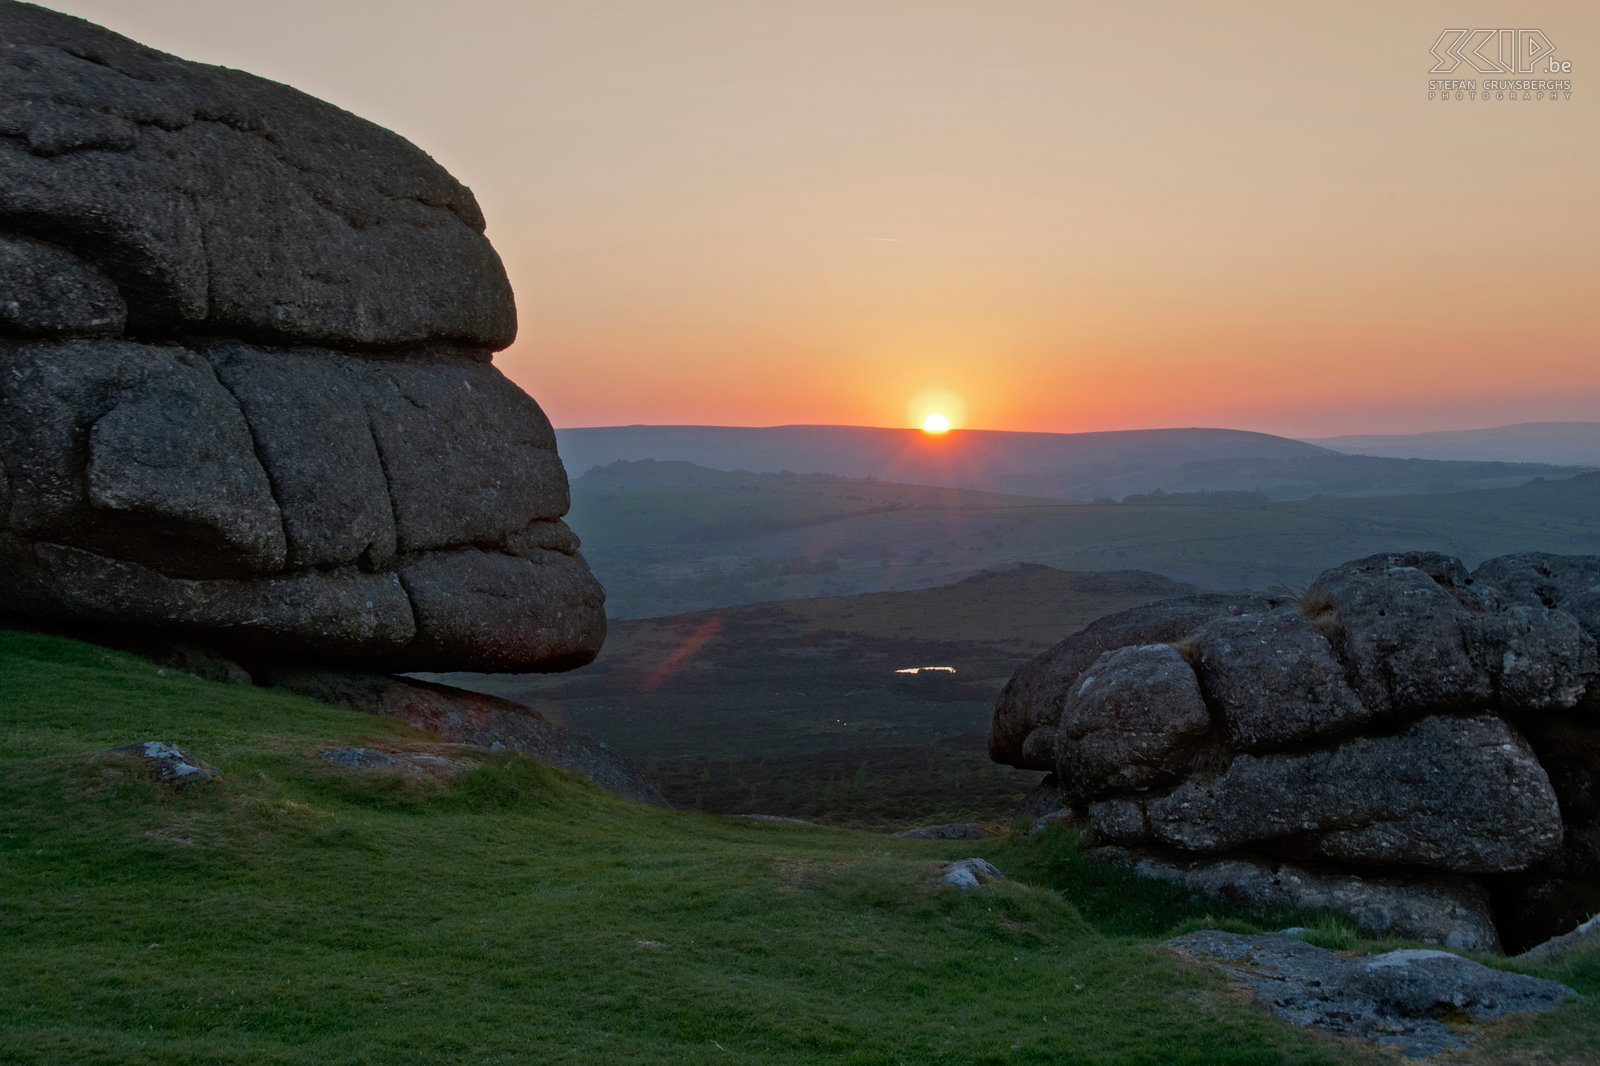 Dartmoor - Sunset at Haytor Rocks Dartmoor is a national park in Devon and the moorland is capped with many exposed granite hilltops known as tors. Sunset at Haytor Rocks in Dartmoor NP. Stefan Cruysberghs